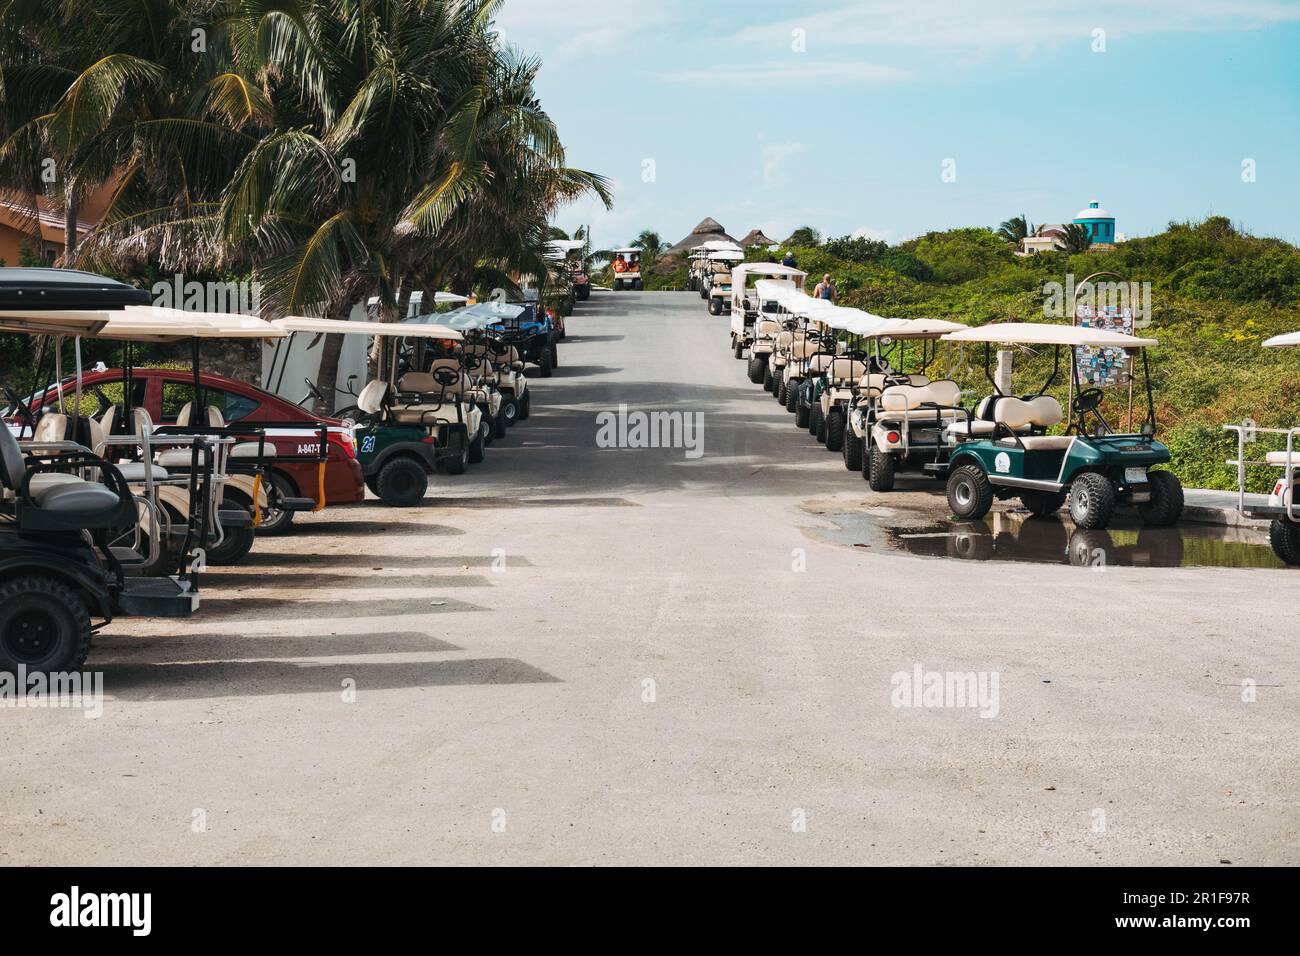 golf carts line the streets of Isla Mujeres, Yucatan, Mexico. The buggies are a popular way of getting around the island Stock Photo